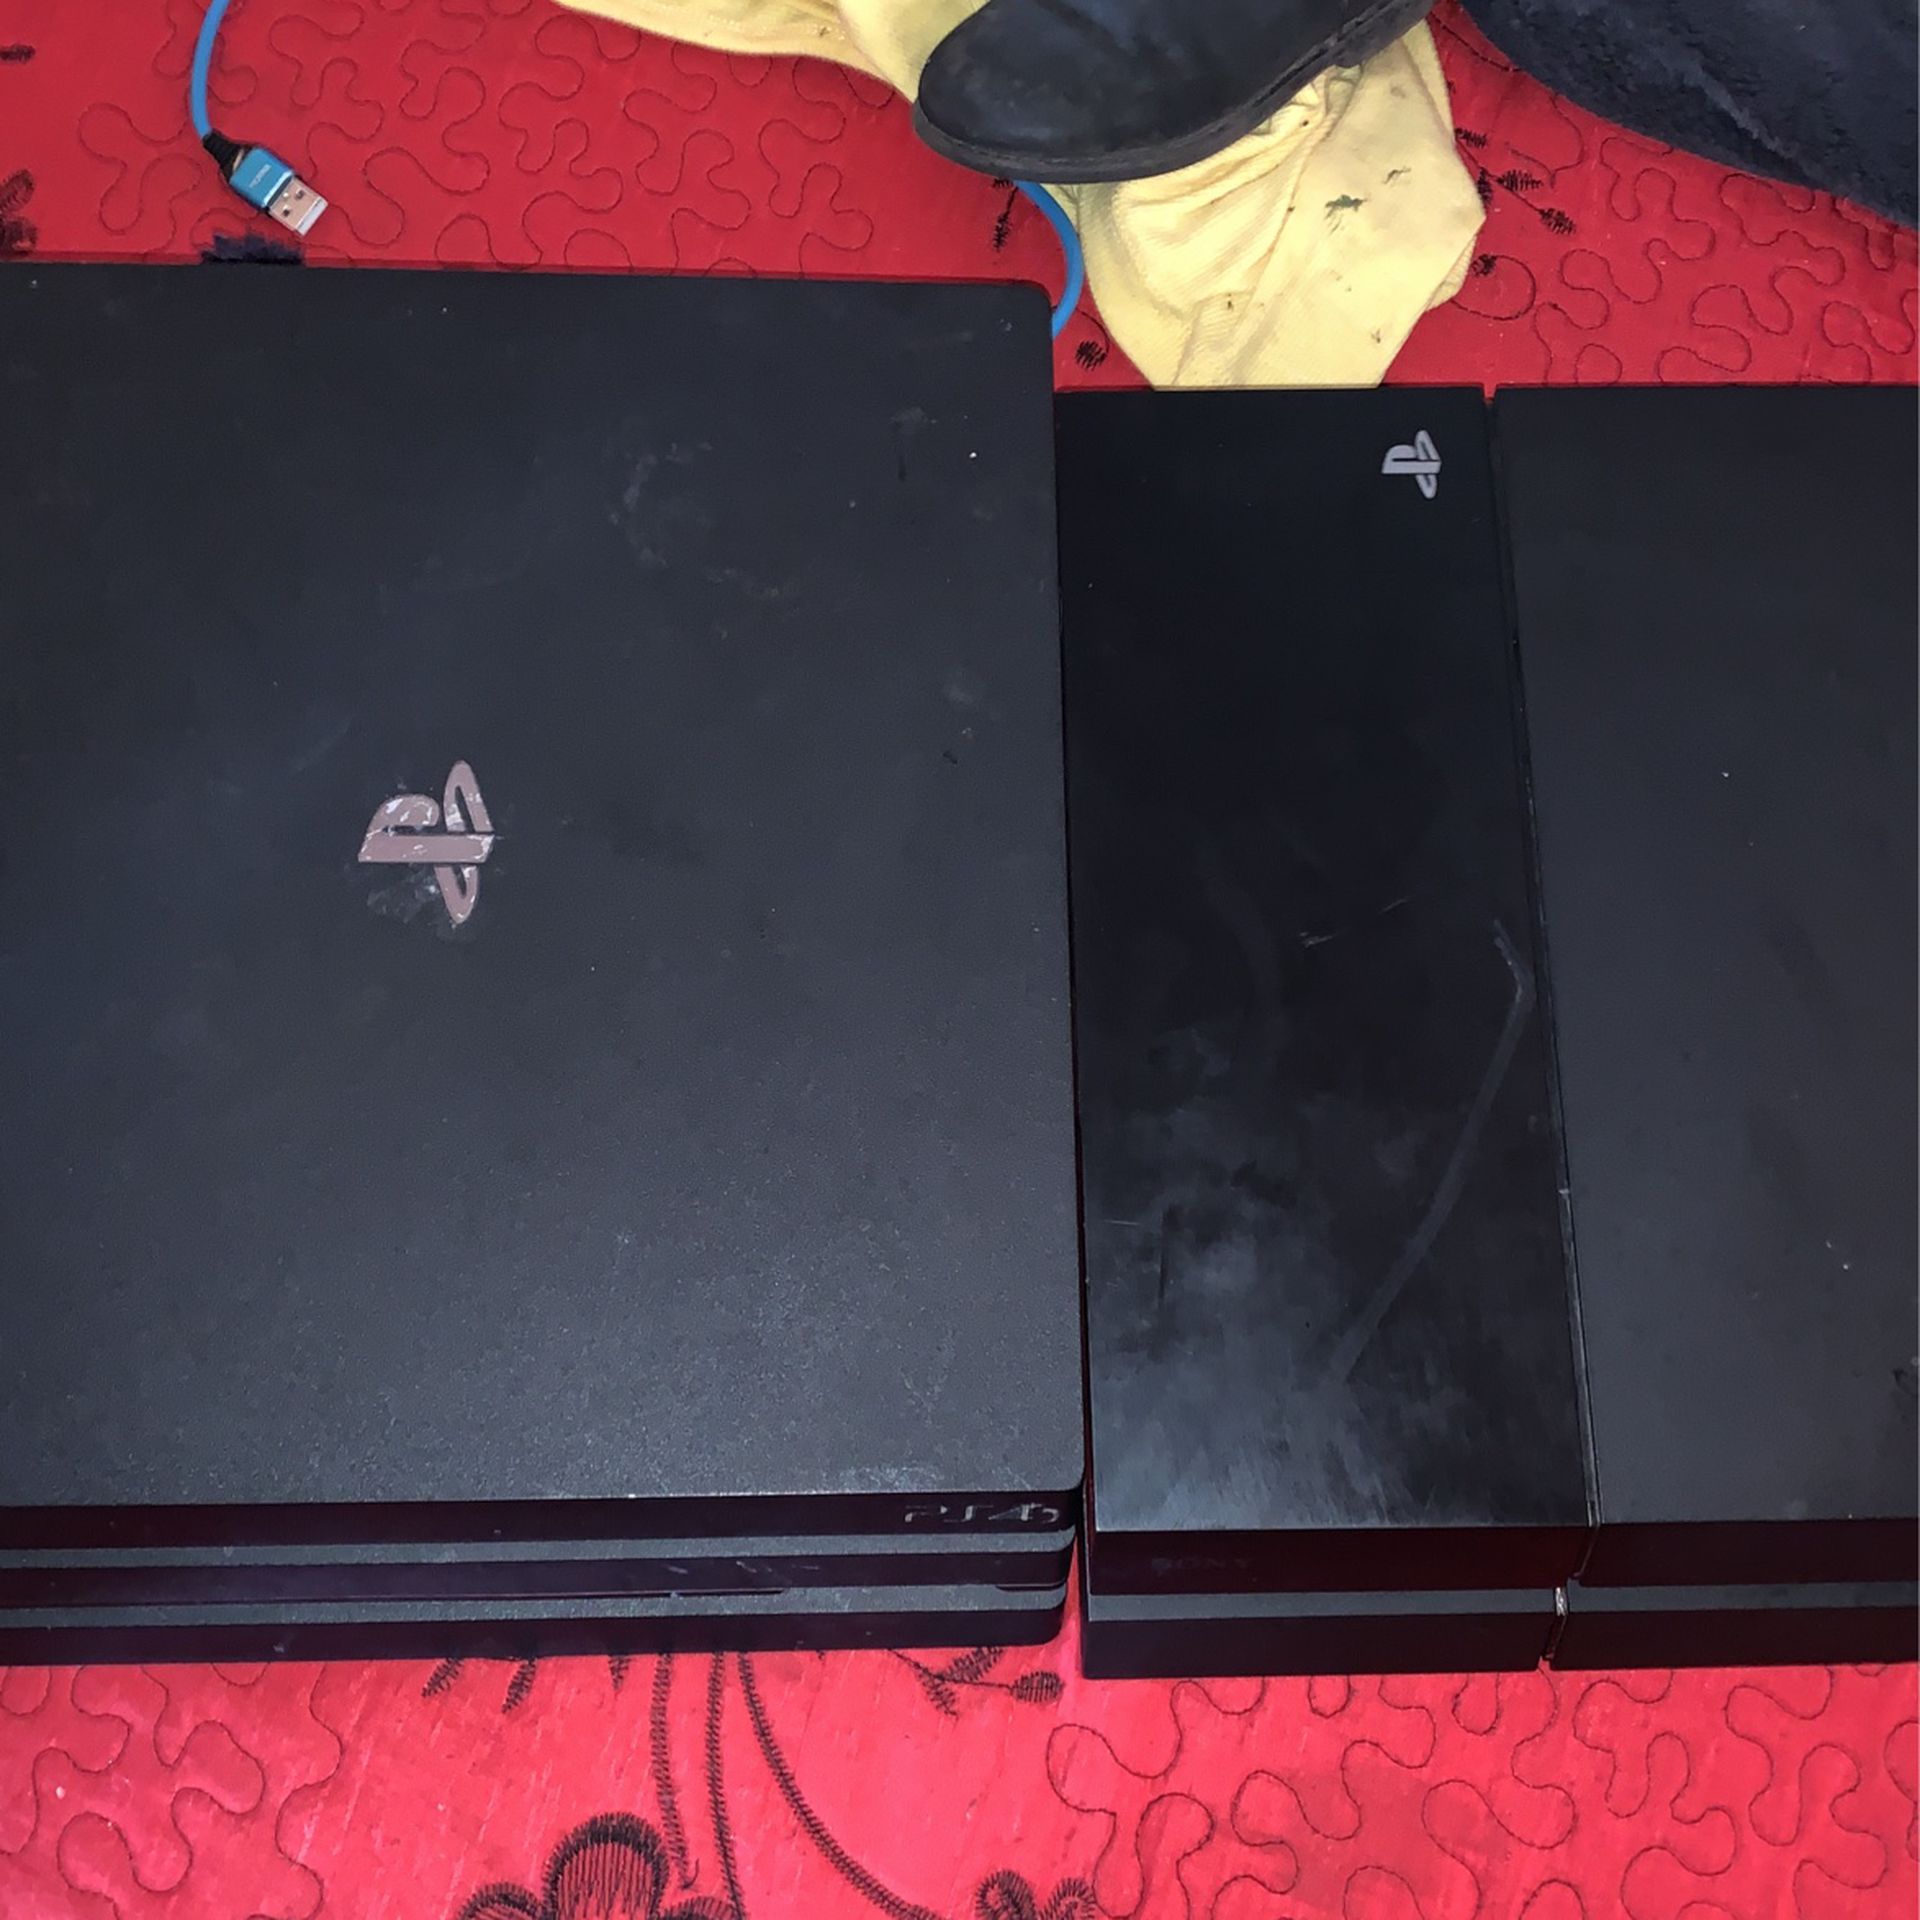 PS4 PRO AND ORIGINAL FOR PARTS!